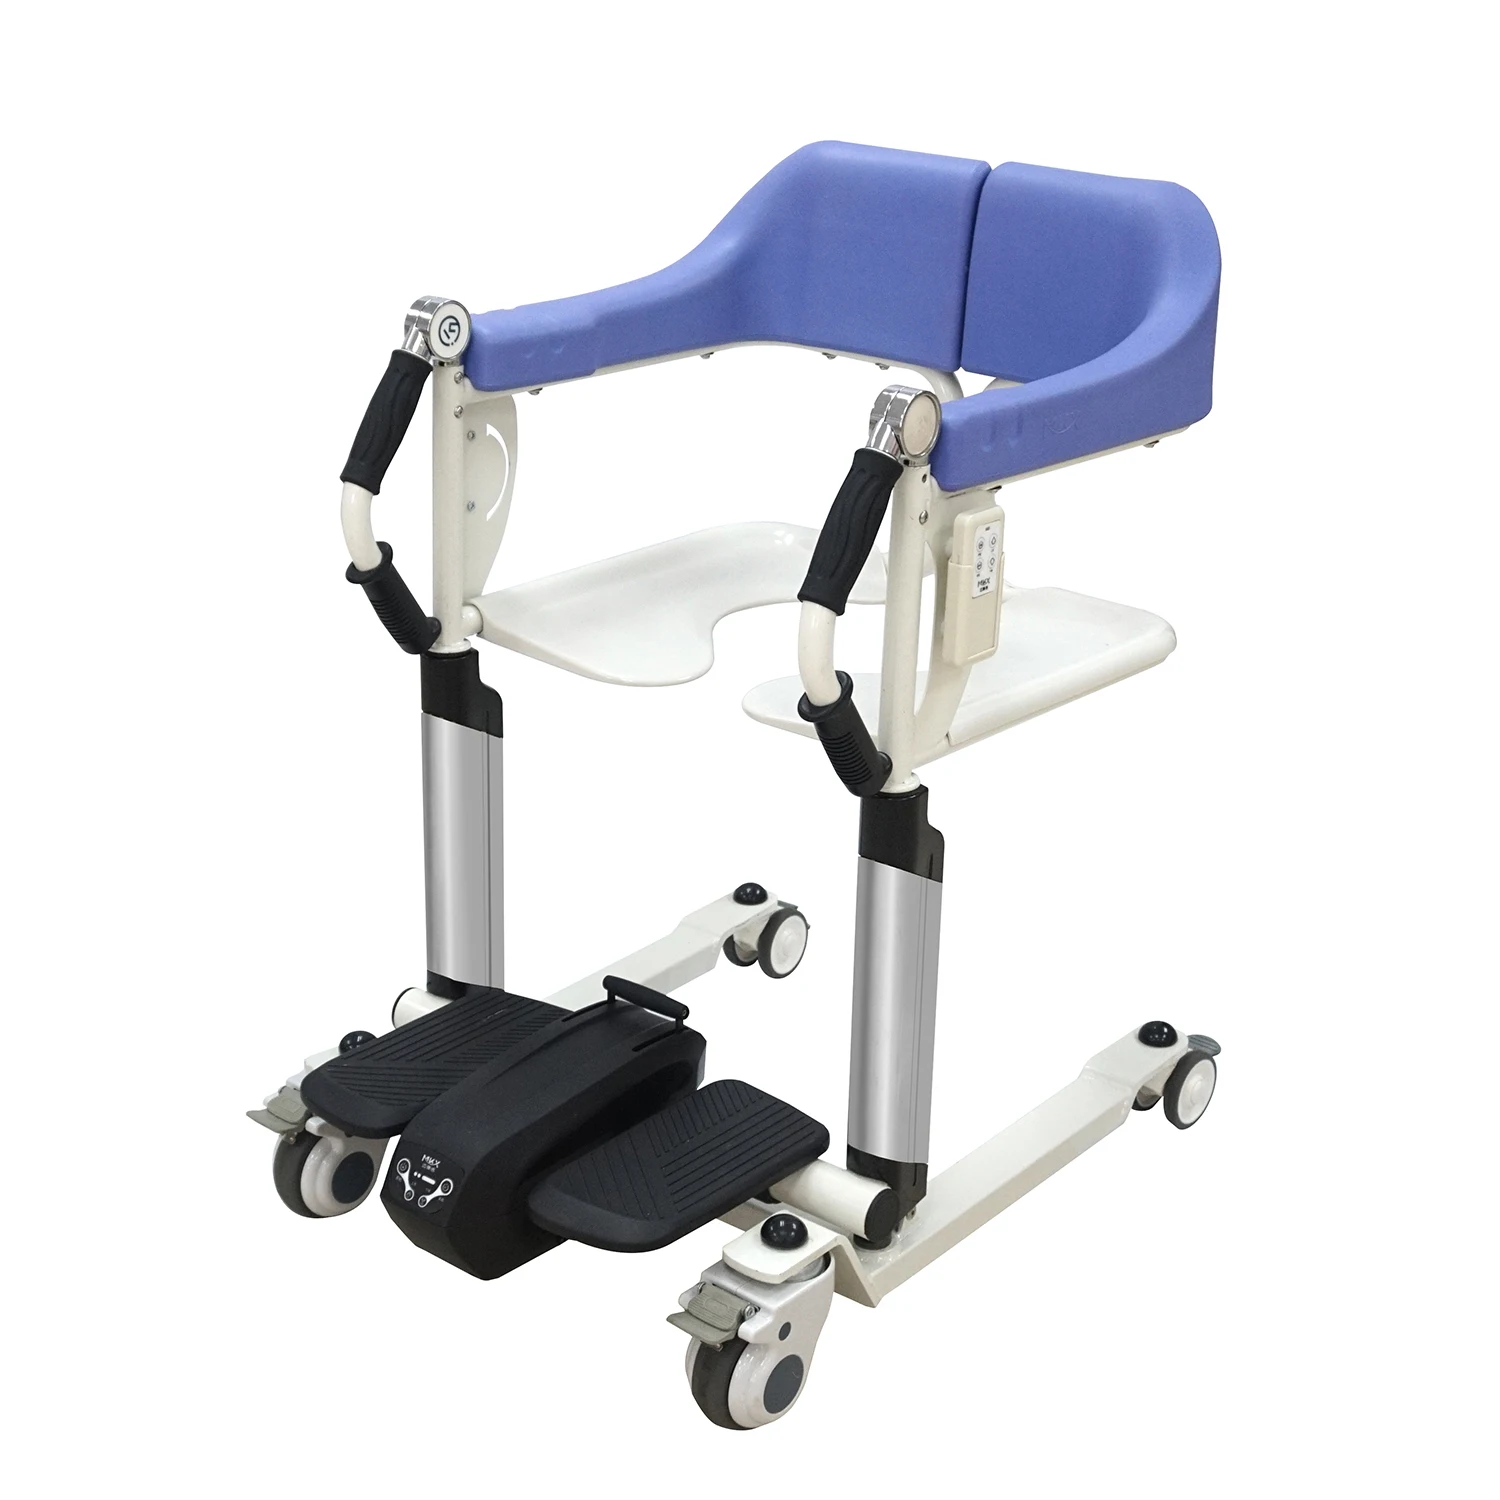 

Portable Medical Electric Hydraulic Move Toilet Transfer Lift Commode Chair for Elderly Patient